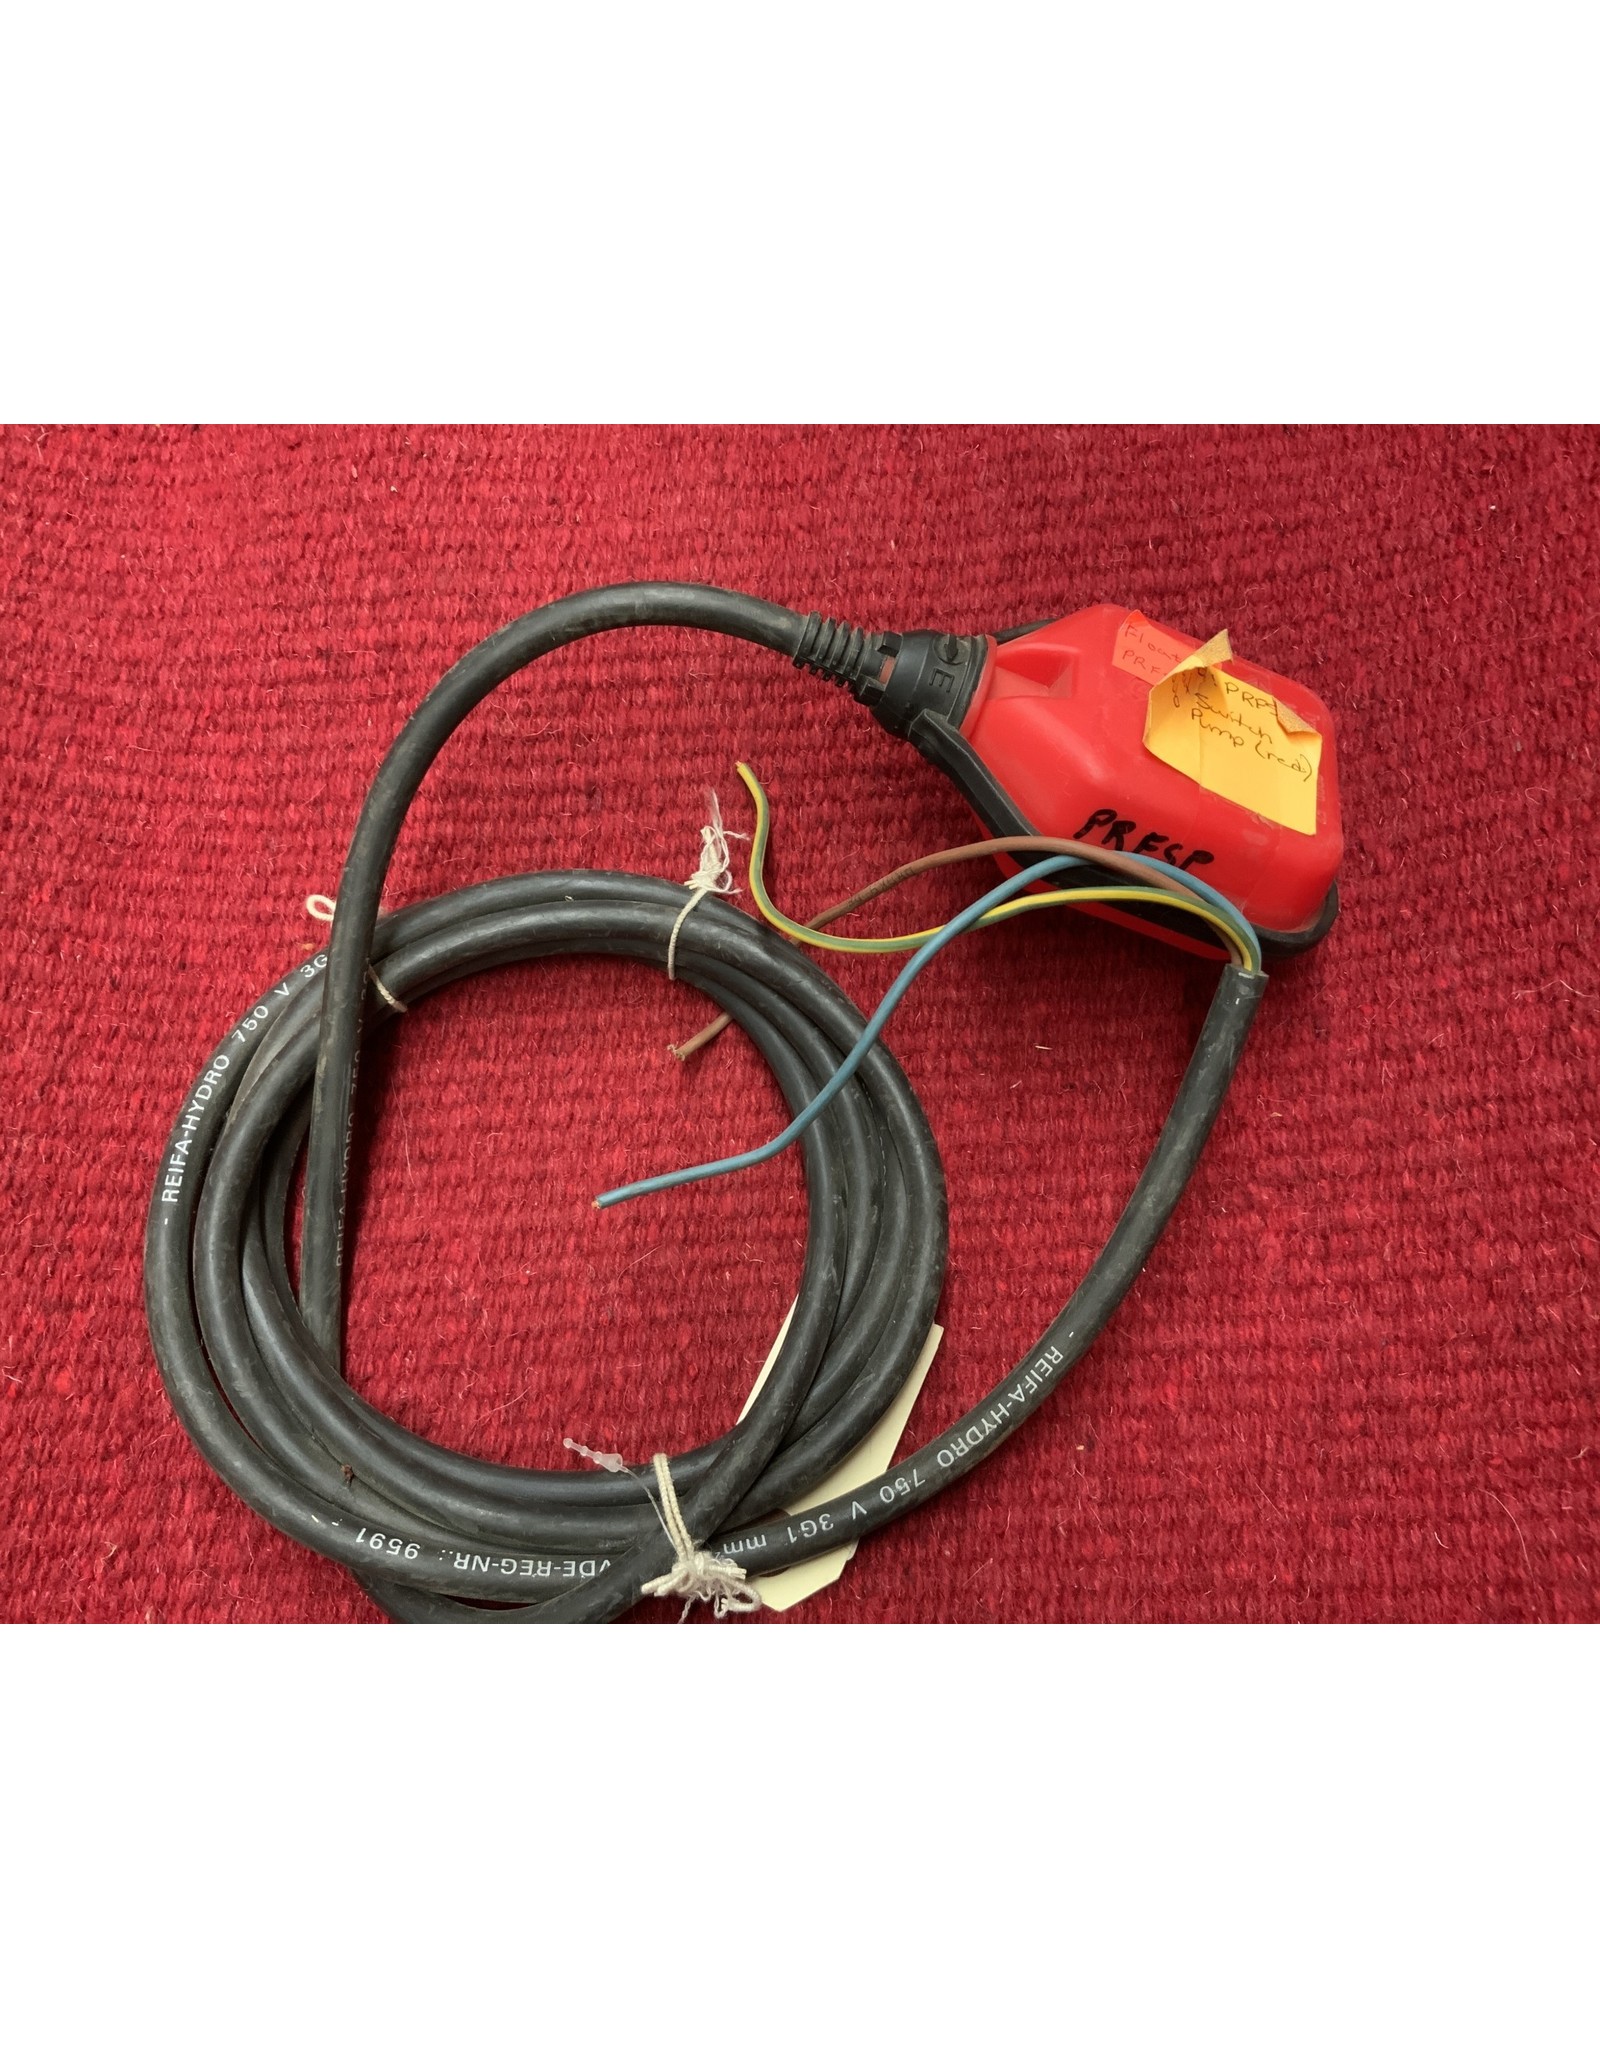 Float Switch for Submersible (RED) PJEEFSP PRFSP